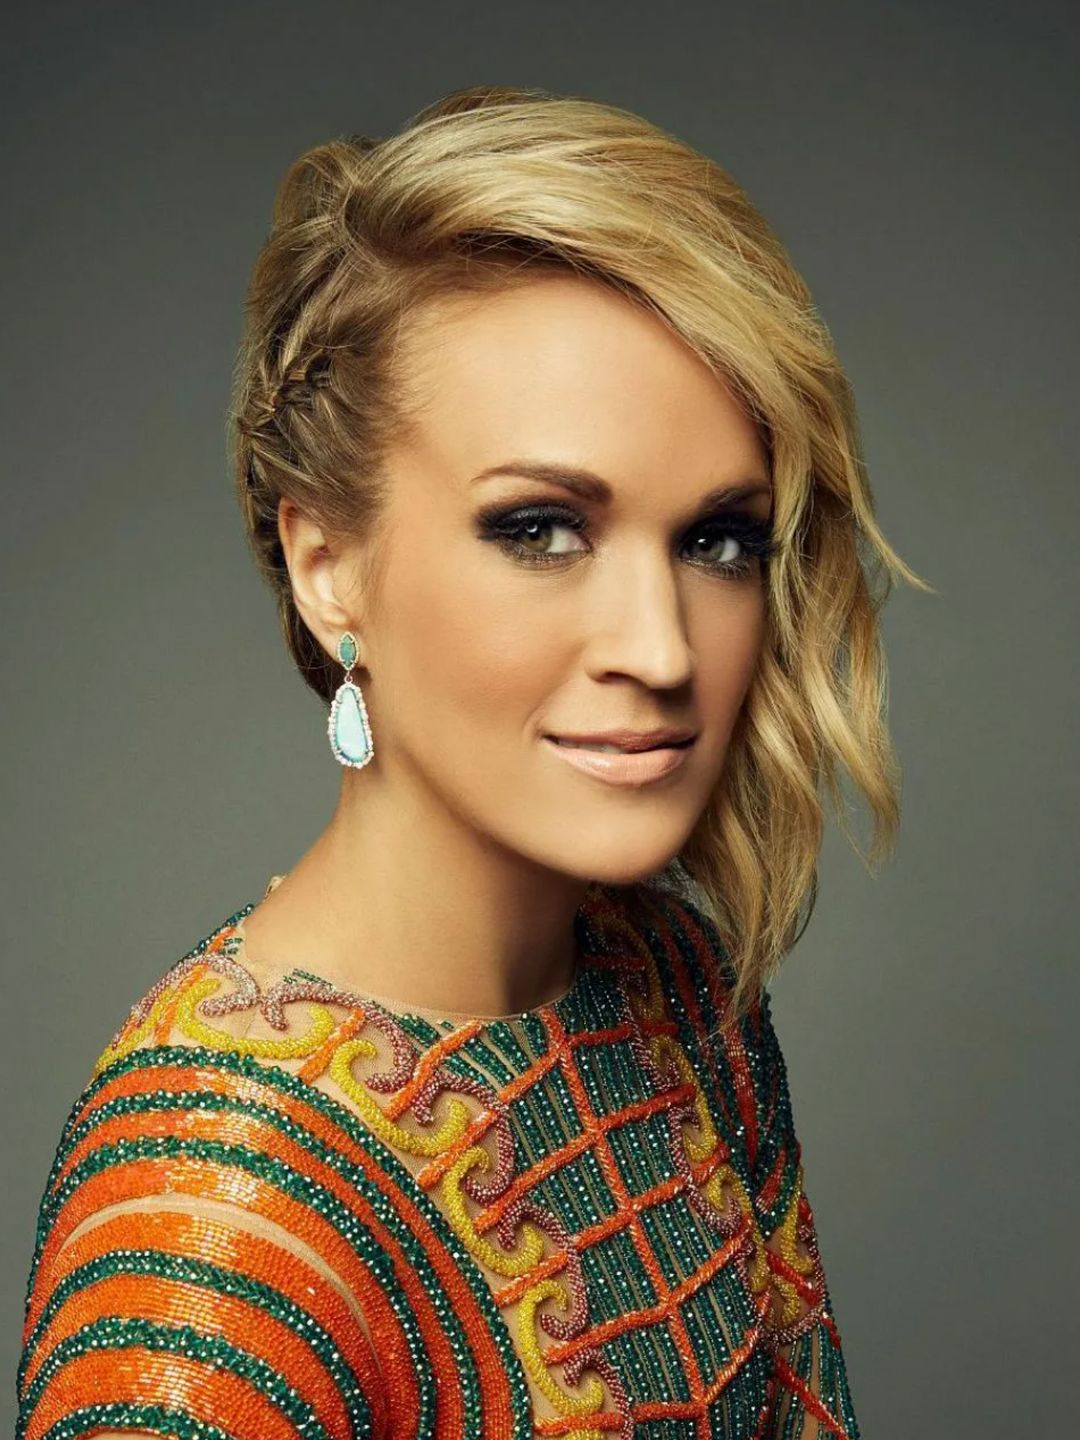 Carrie Underwood who is her father